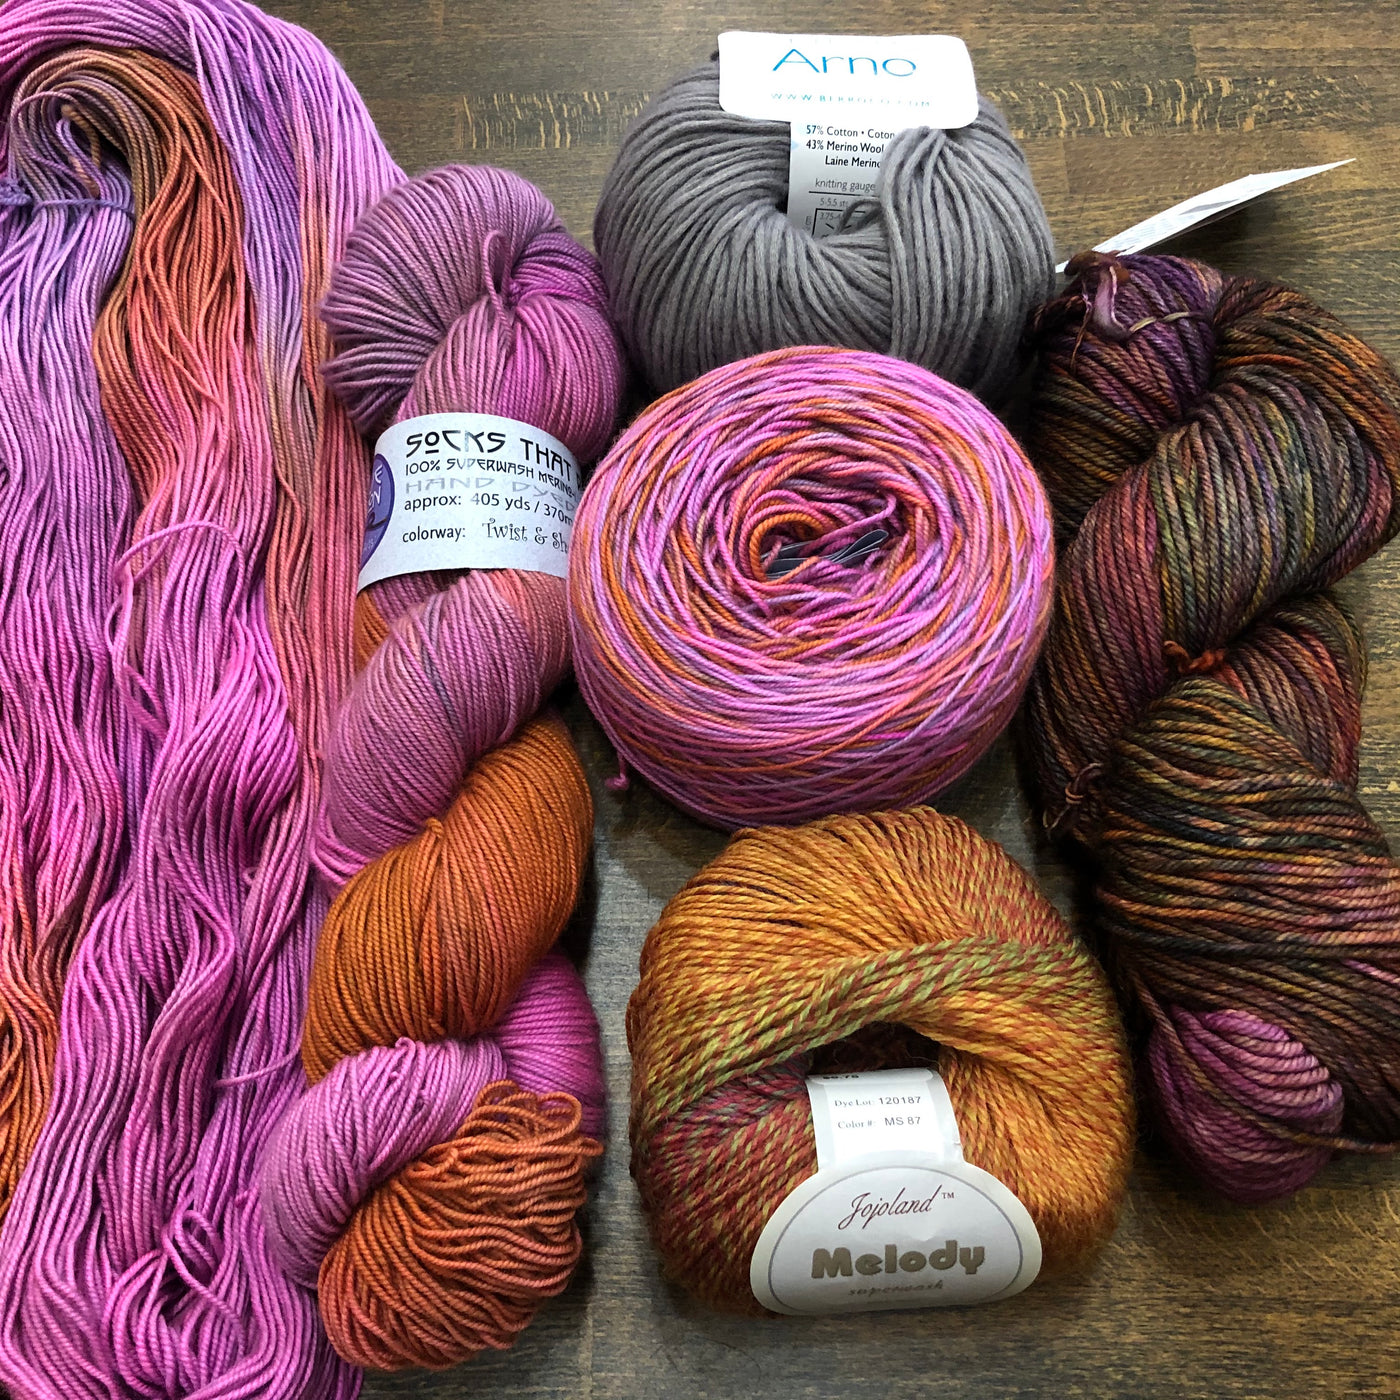 How to Find Both Ends of a Skein of Yarn